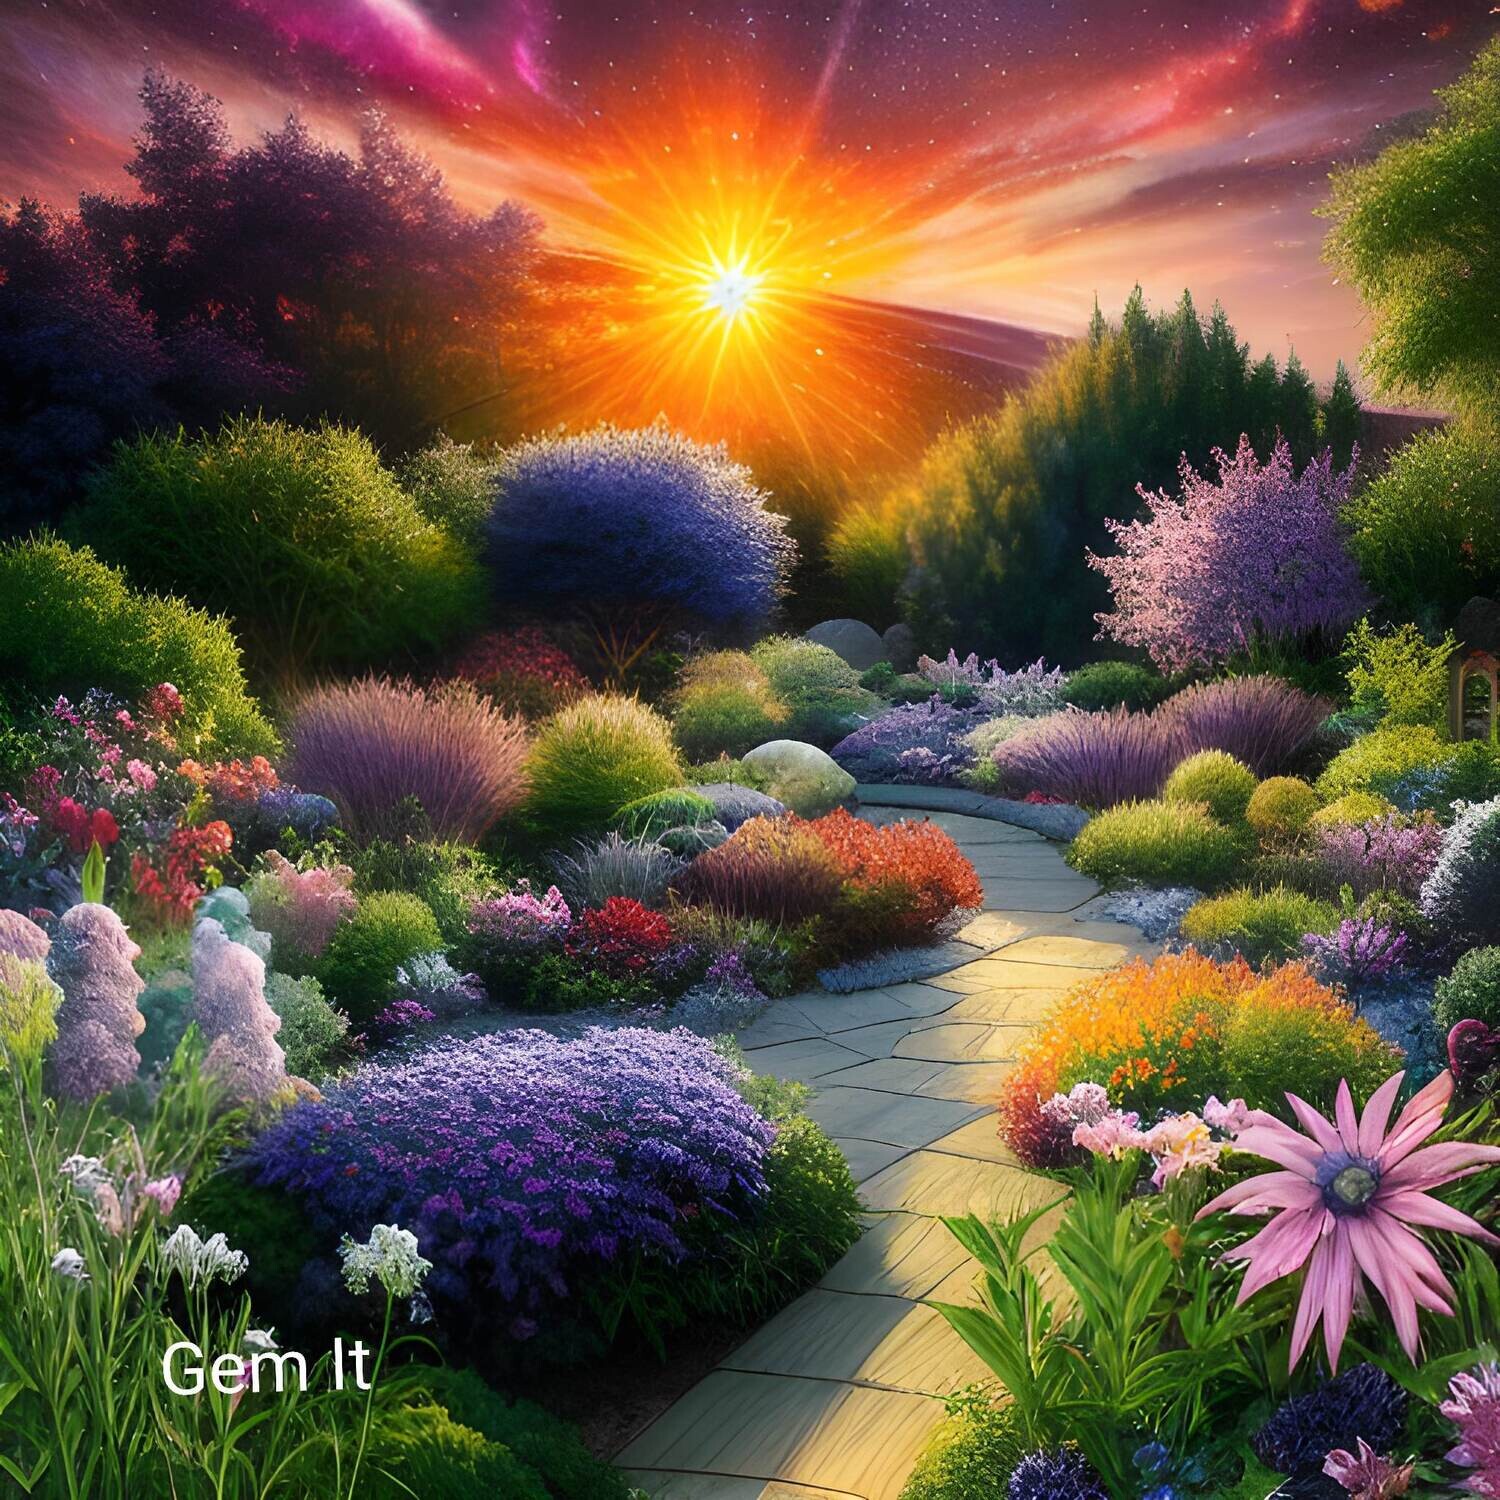 Flower Garden - Full Drill Diamond Painting - Specially ordered for you. Delivery is approximately 4 - 6 weeks.